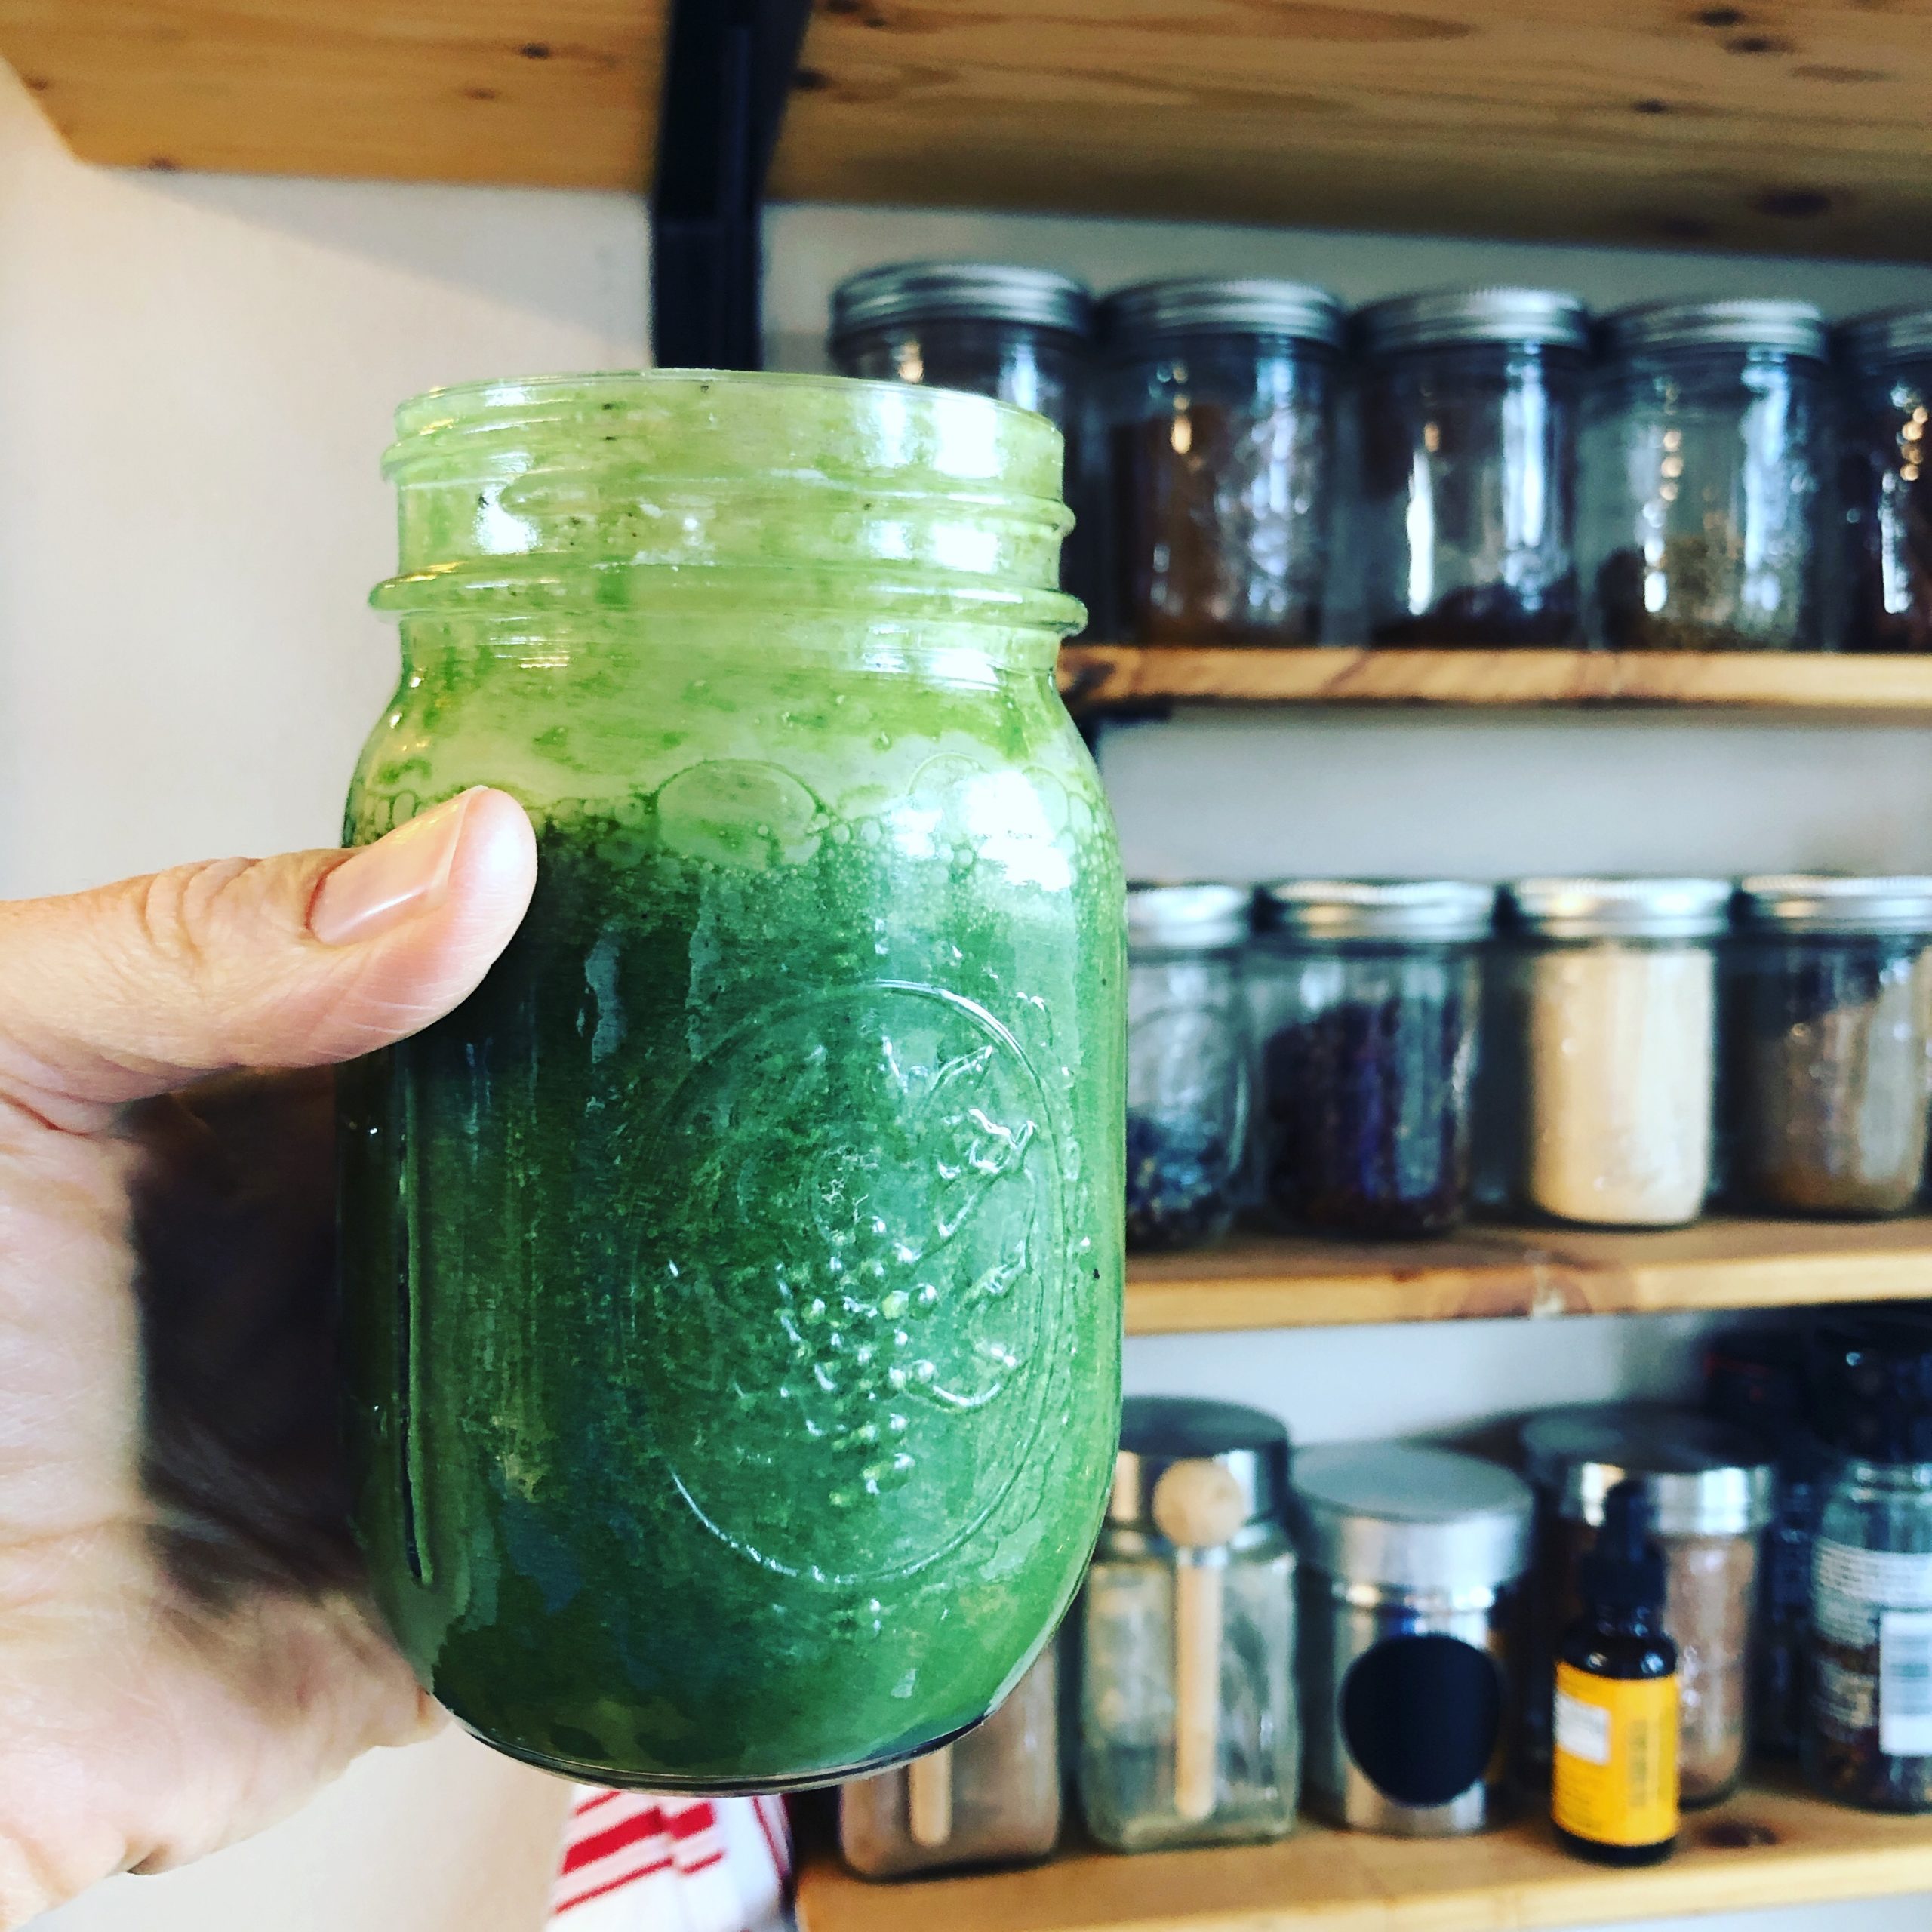 My Green Immune Support AIP Superfood Smoothie